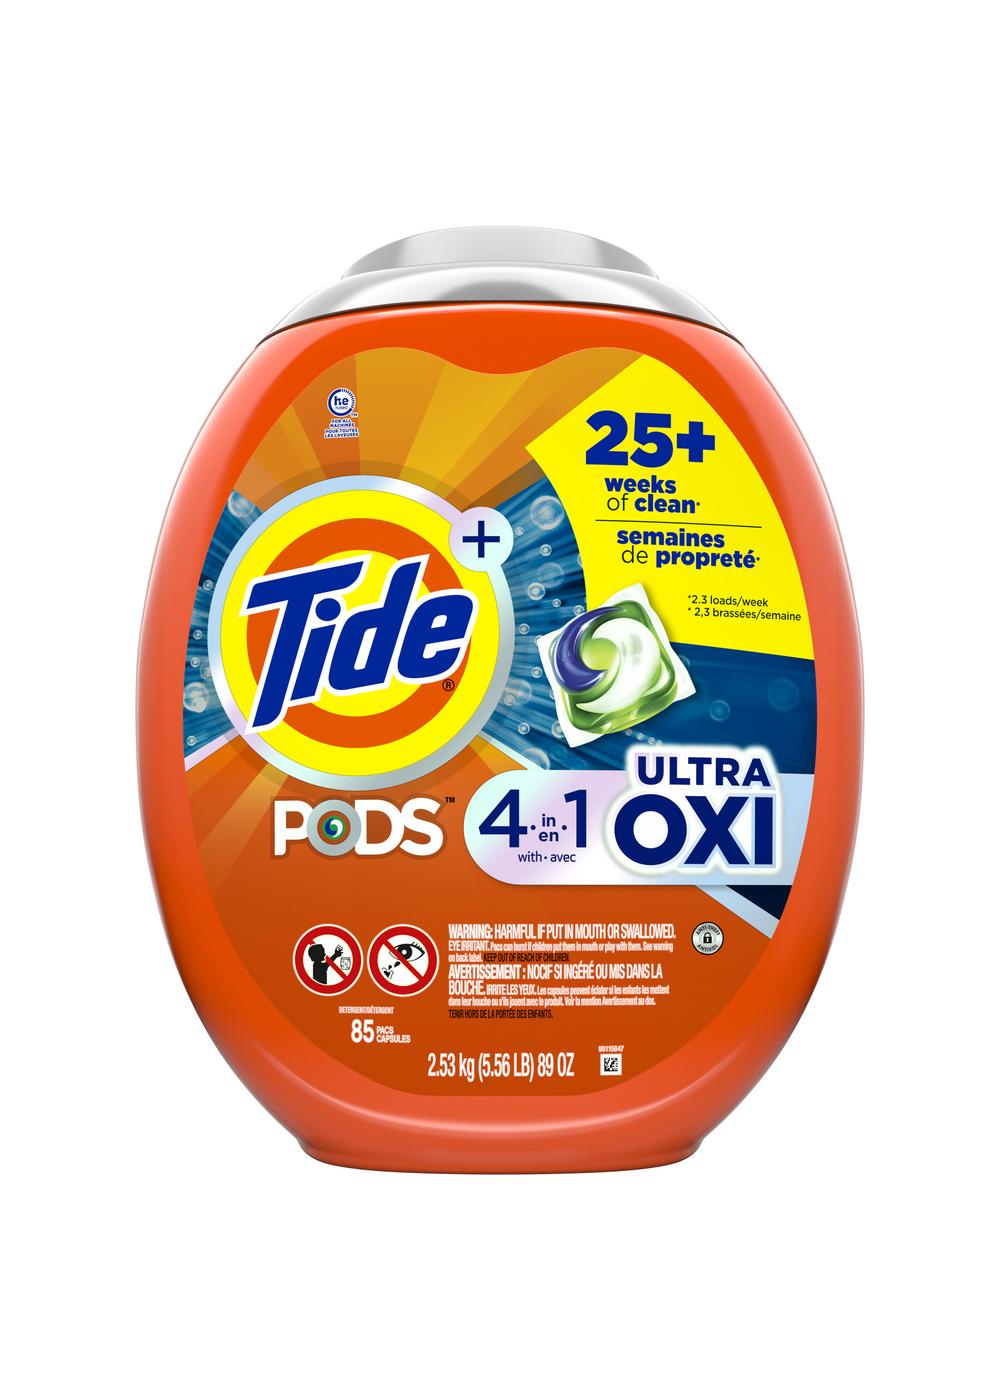 Tide PODS Ultra Oxi HE Laundry Detergent Pacs; image 1 of 9